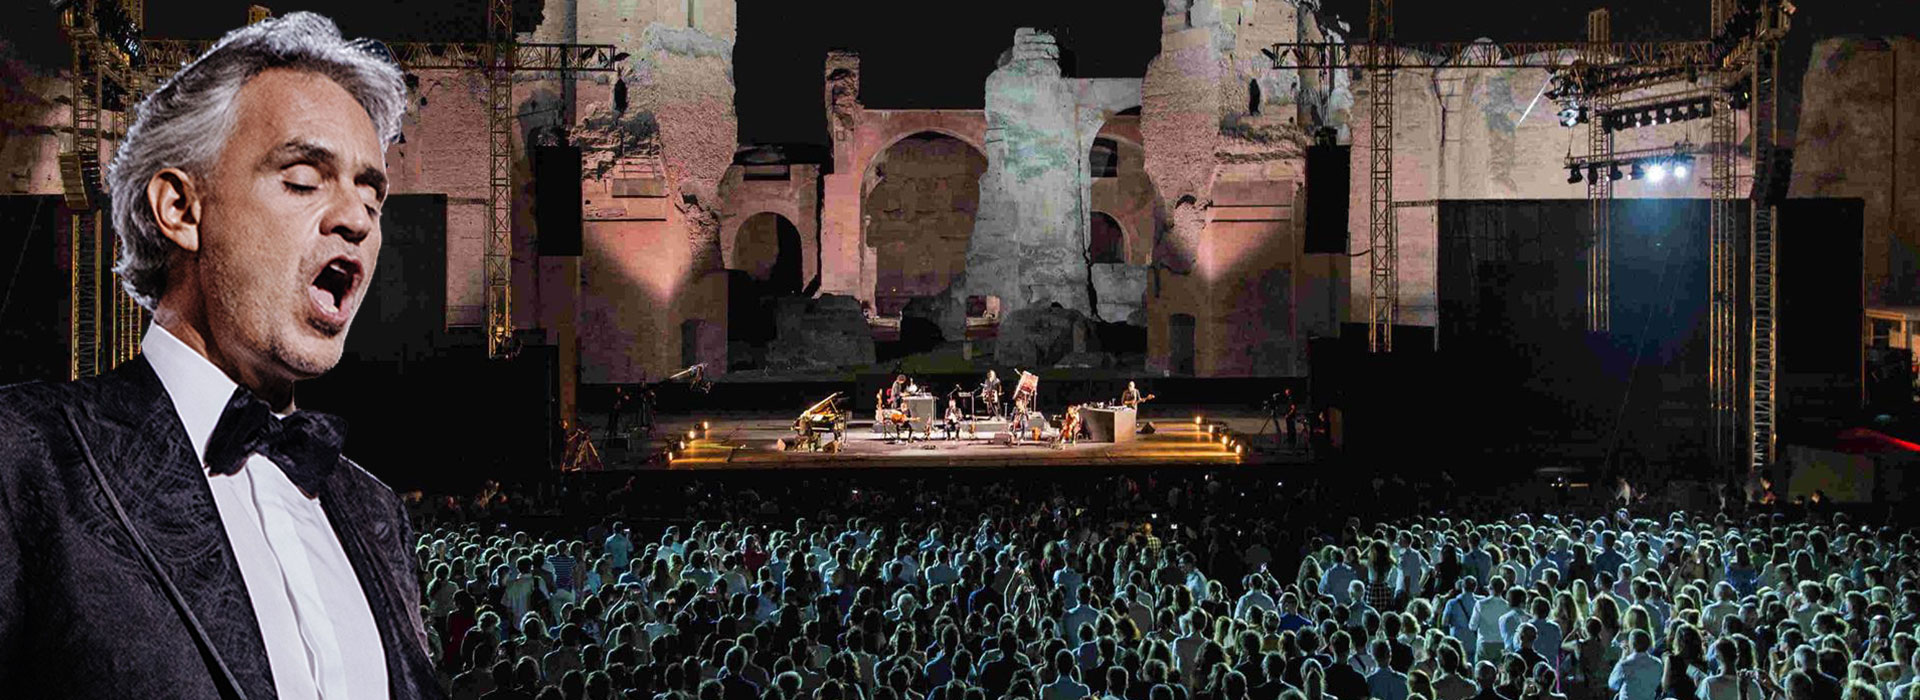 Andrea Bocelli Concerts Private & Group Tours in Italy Great Italy Tour